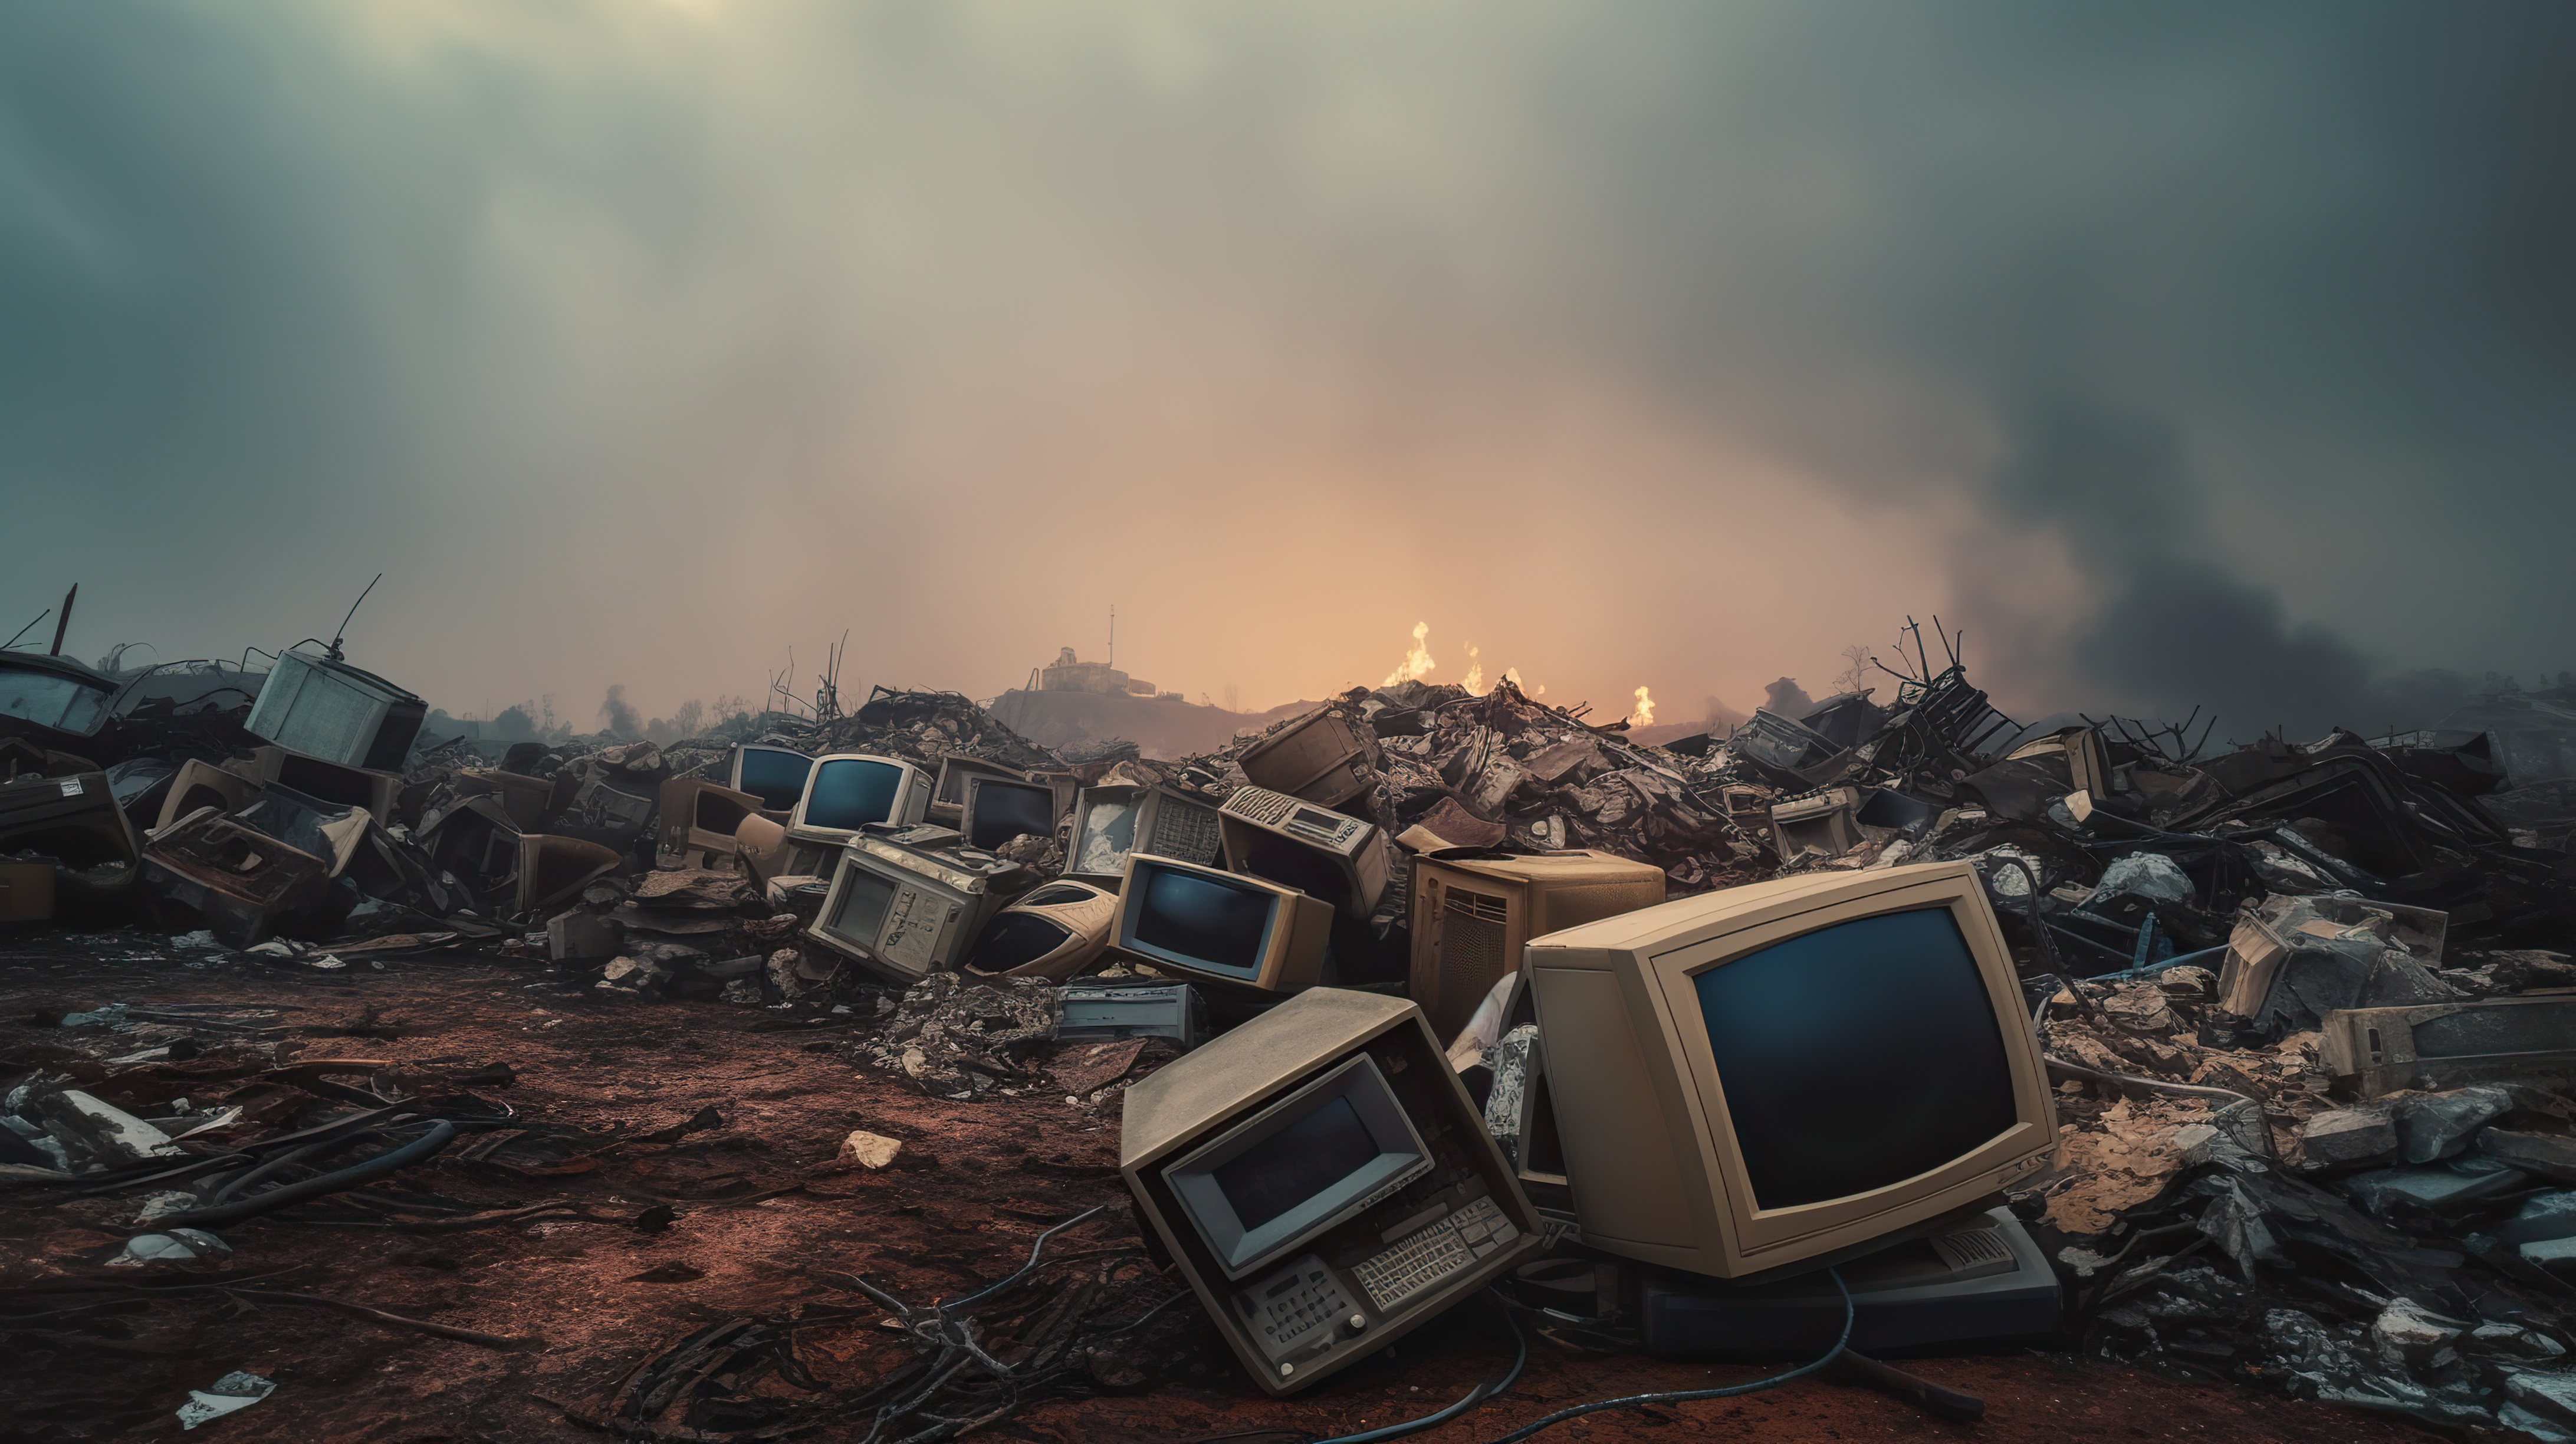 Landfill with old, rusted and broken televisions and apocalyptic background